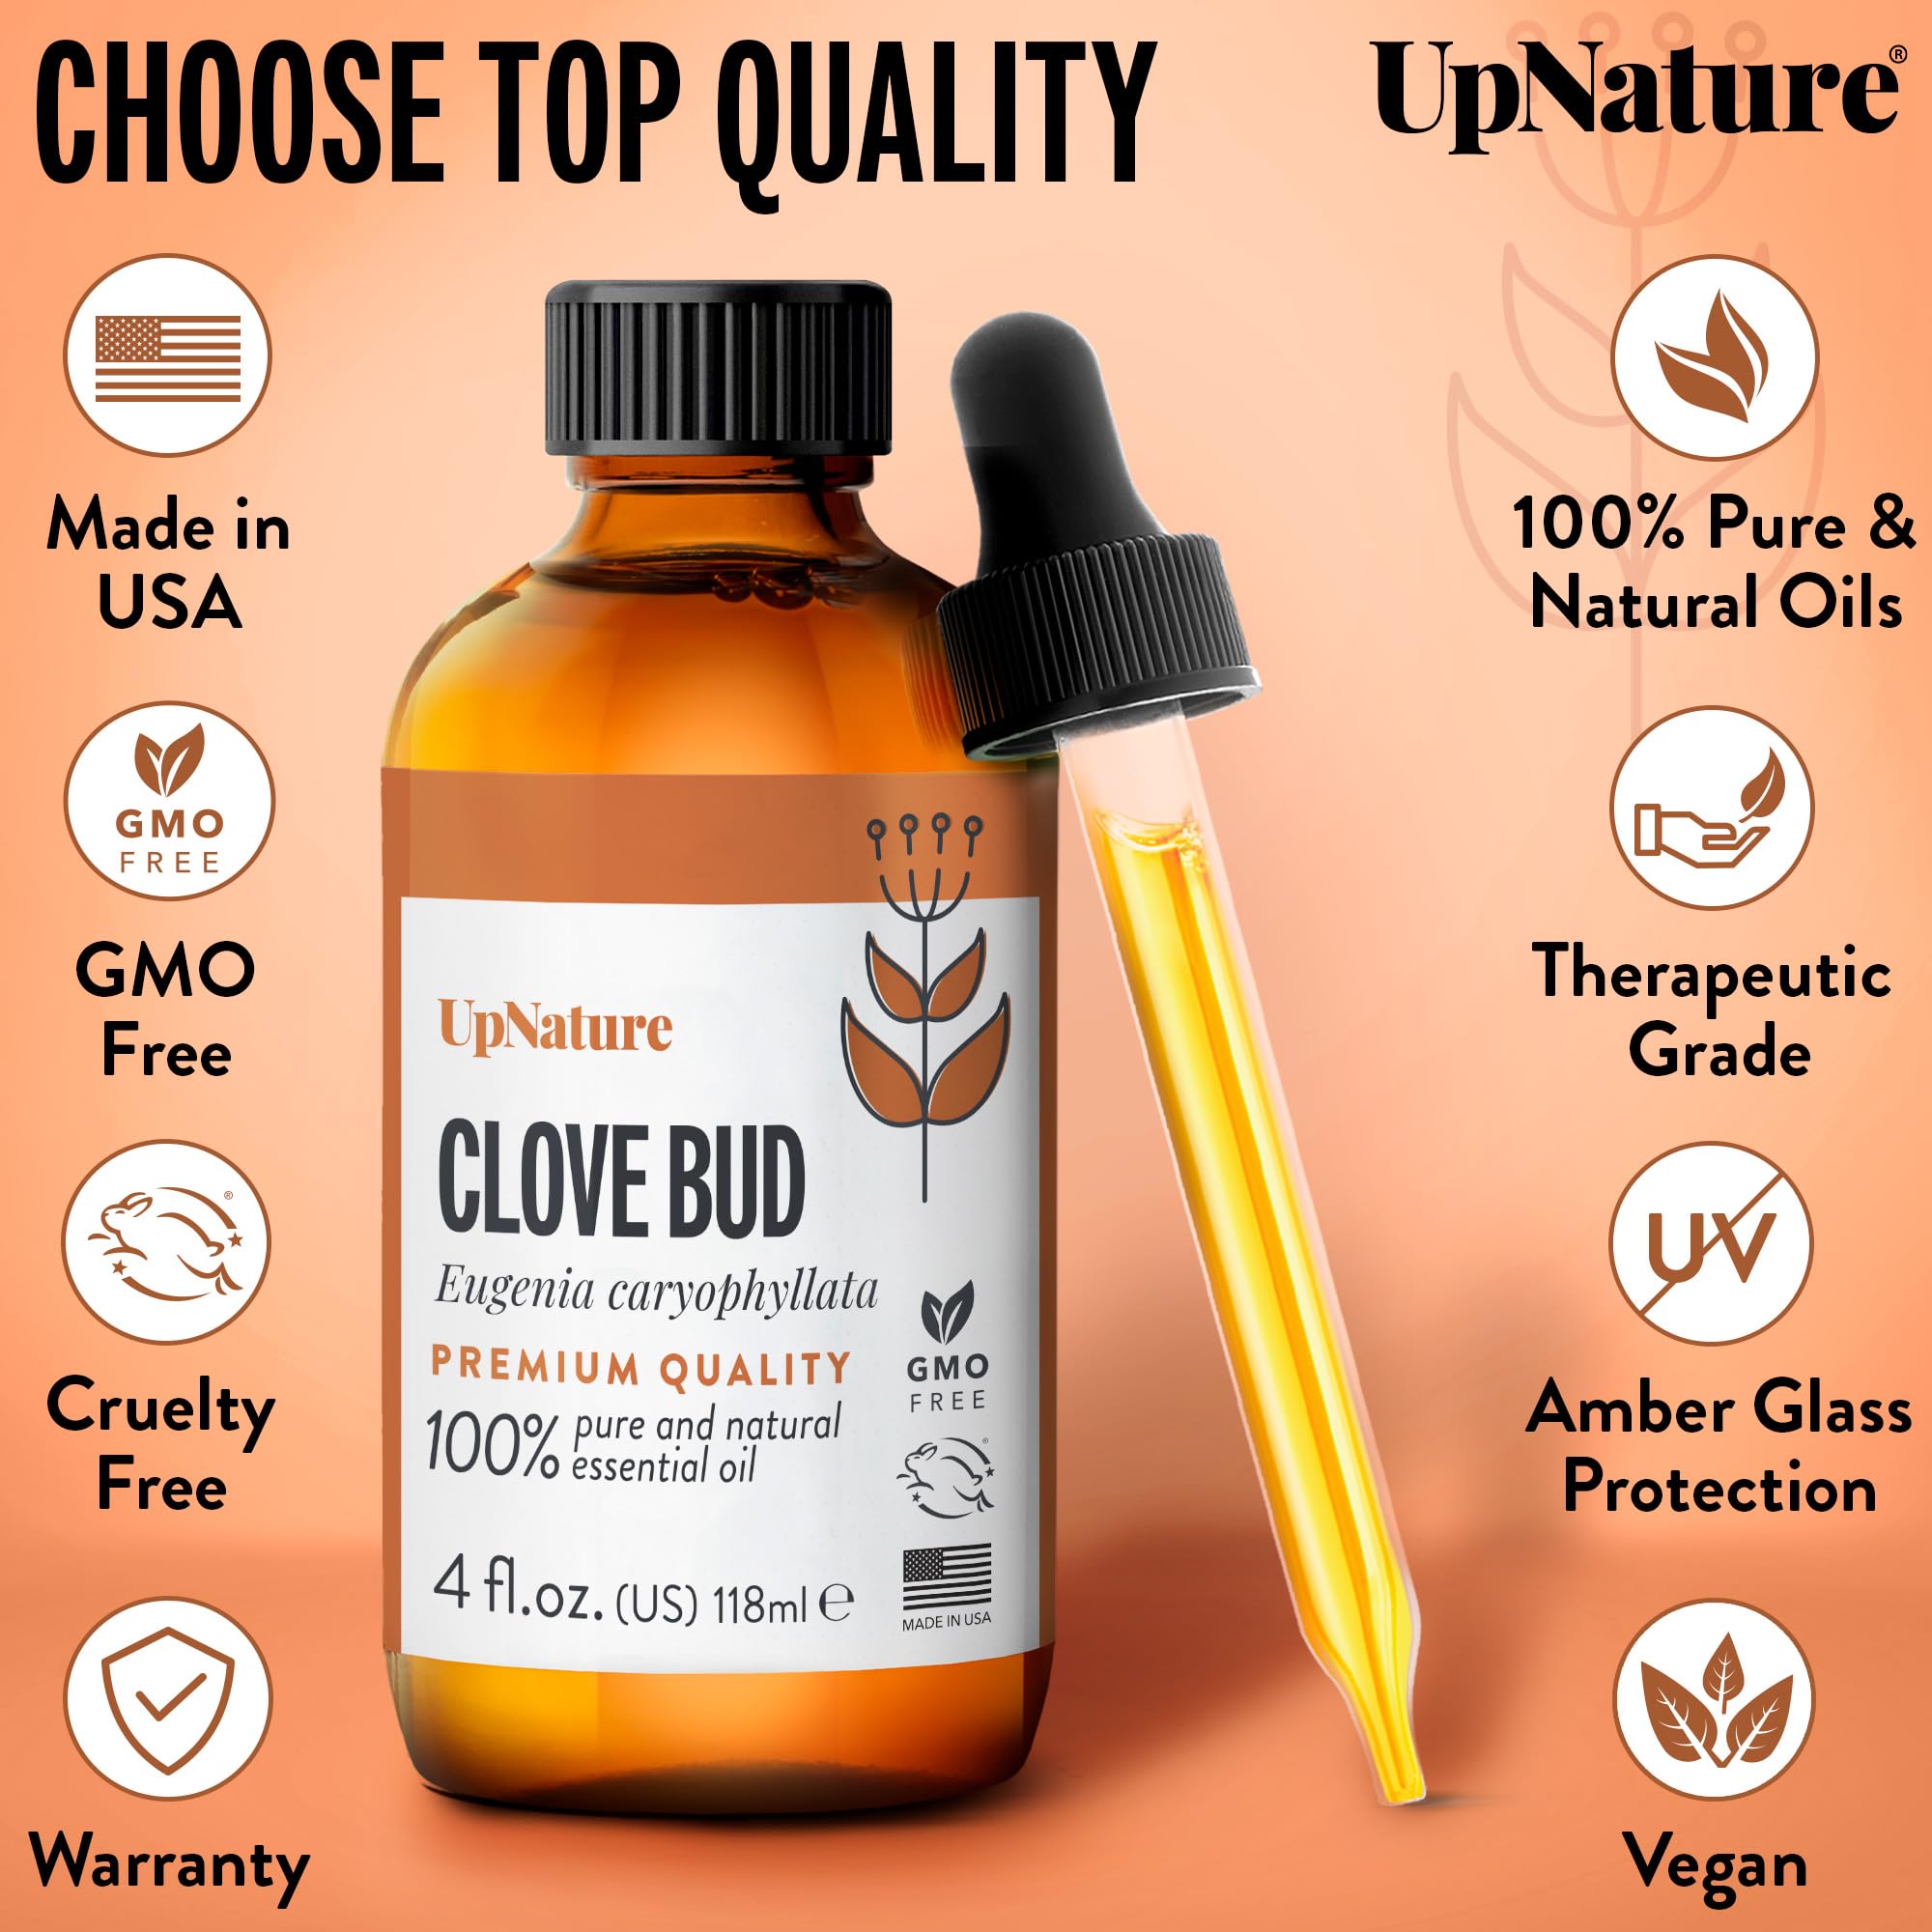 UpNature Clove Essential Oil - 100% Natural & Pure, Undiluted, Premium Quality Aromatherapy Oil Relief & Promotes Healthy Gums, Clove Oil for Tooth Aches, Soothe Headaches, 4oz